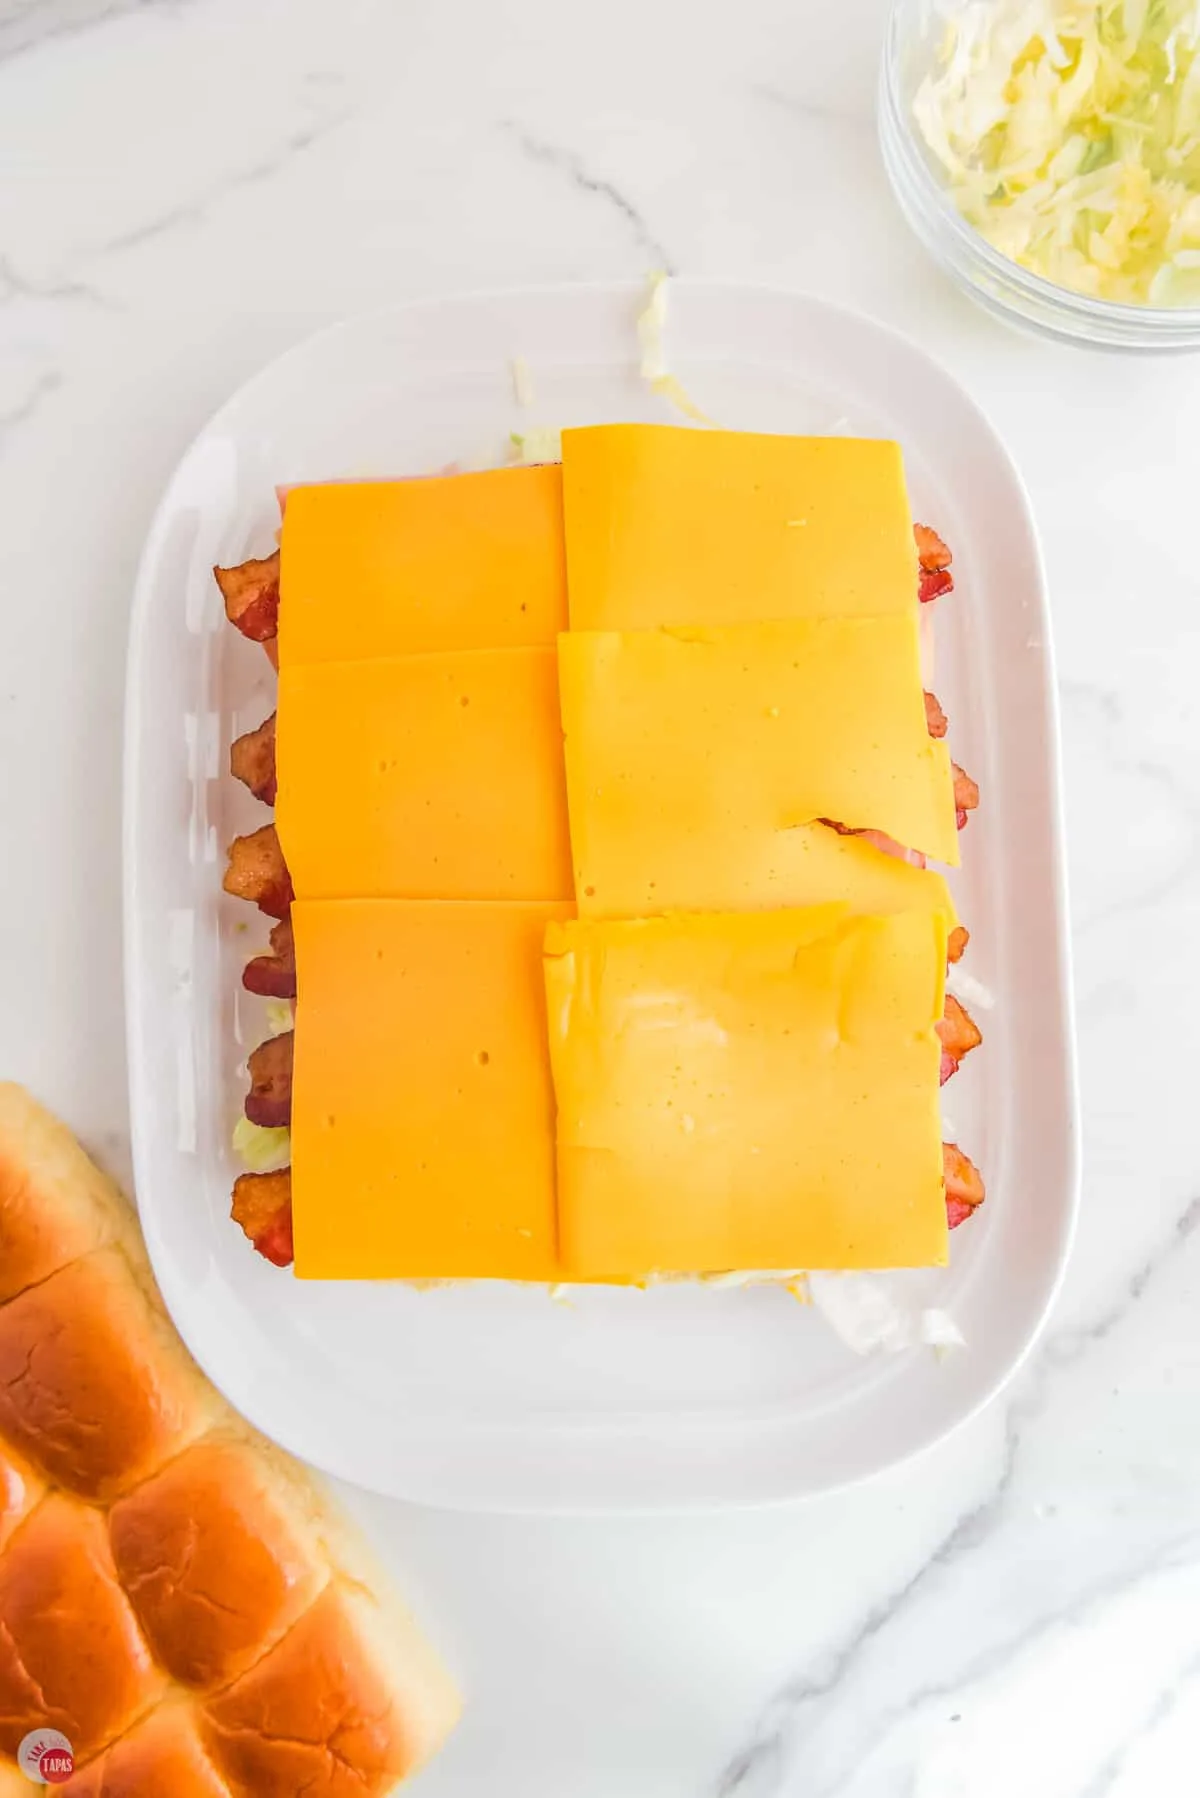 bacon and cheese slices on bread